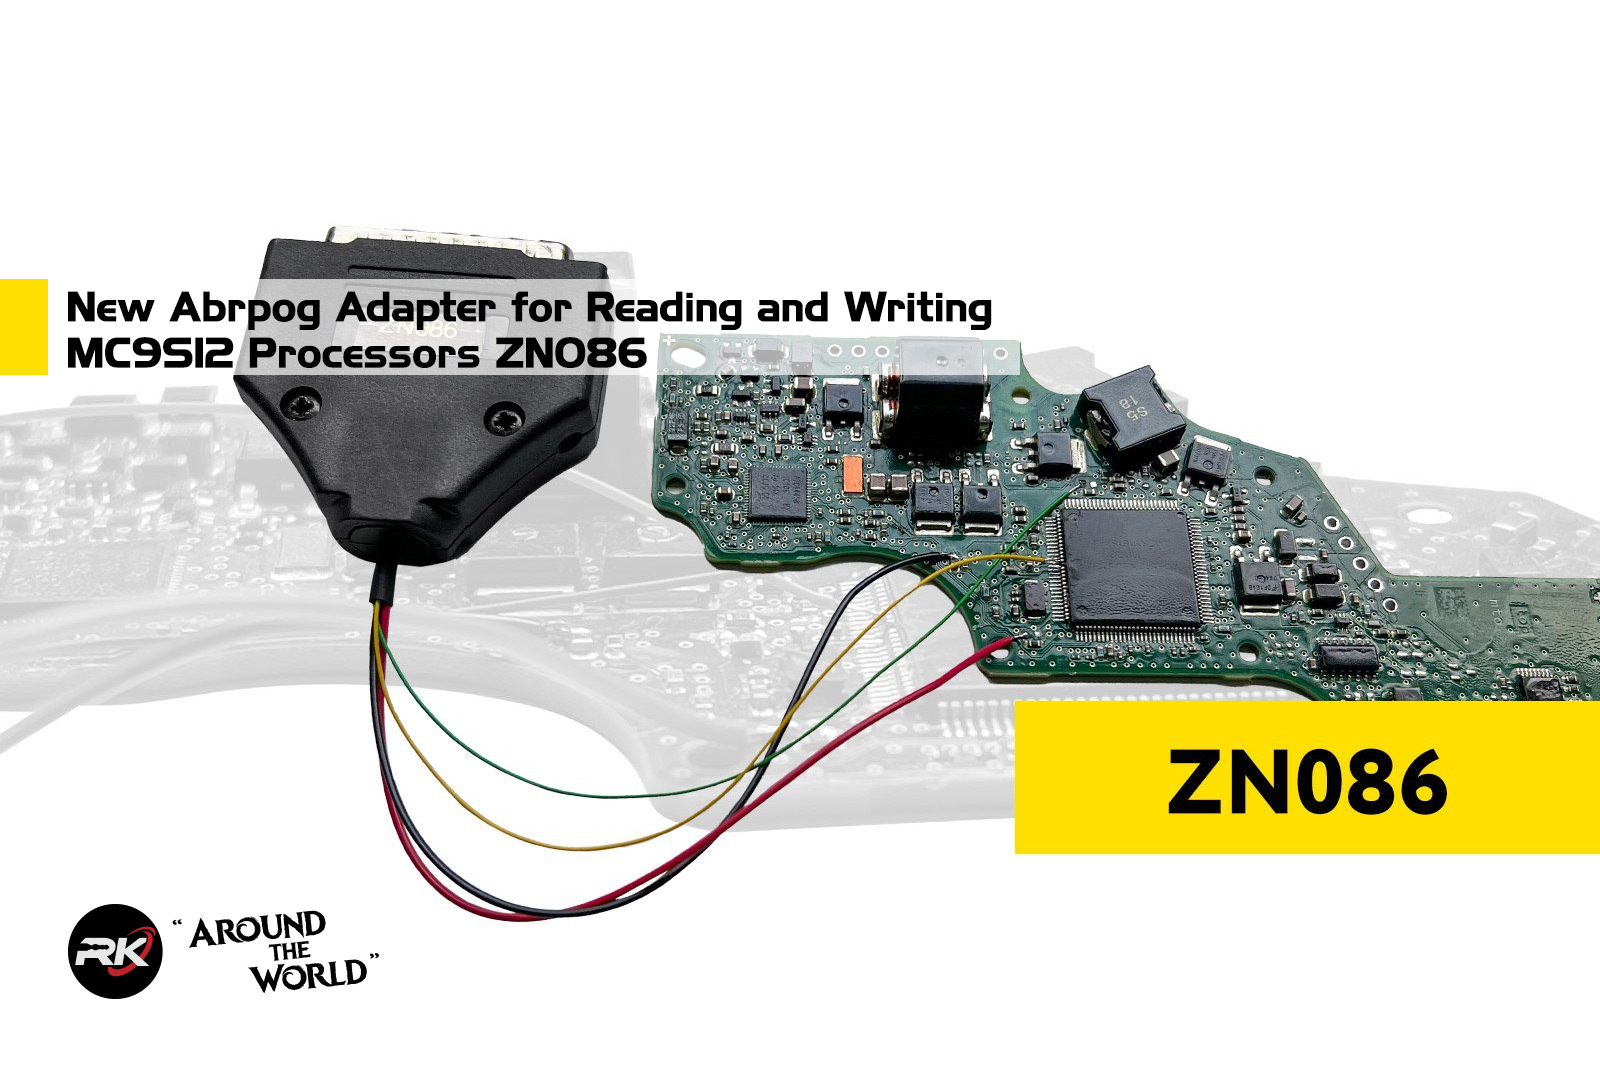 New Abrpog Adapter for Reading and Writing MC9S12 Processors